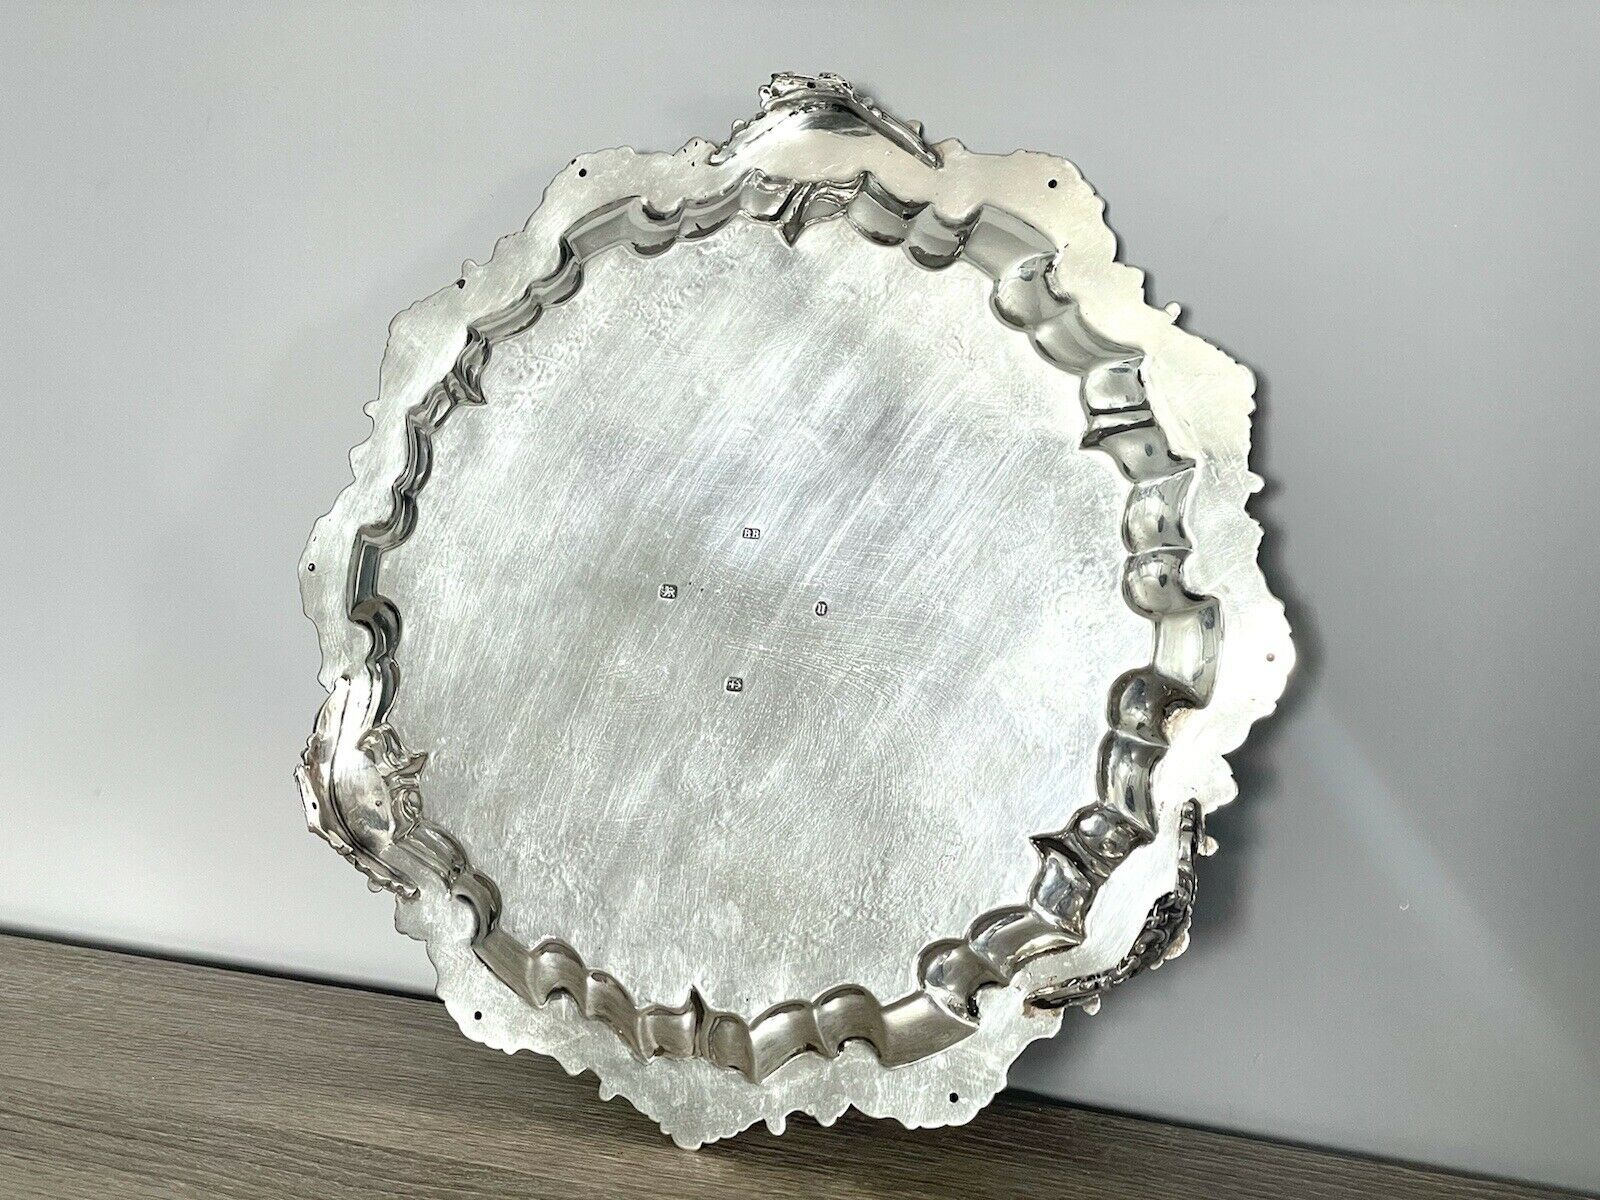 Silver Salver/Tray By Barker Brothers, Birmingham 1894 - 628g